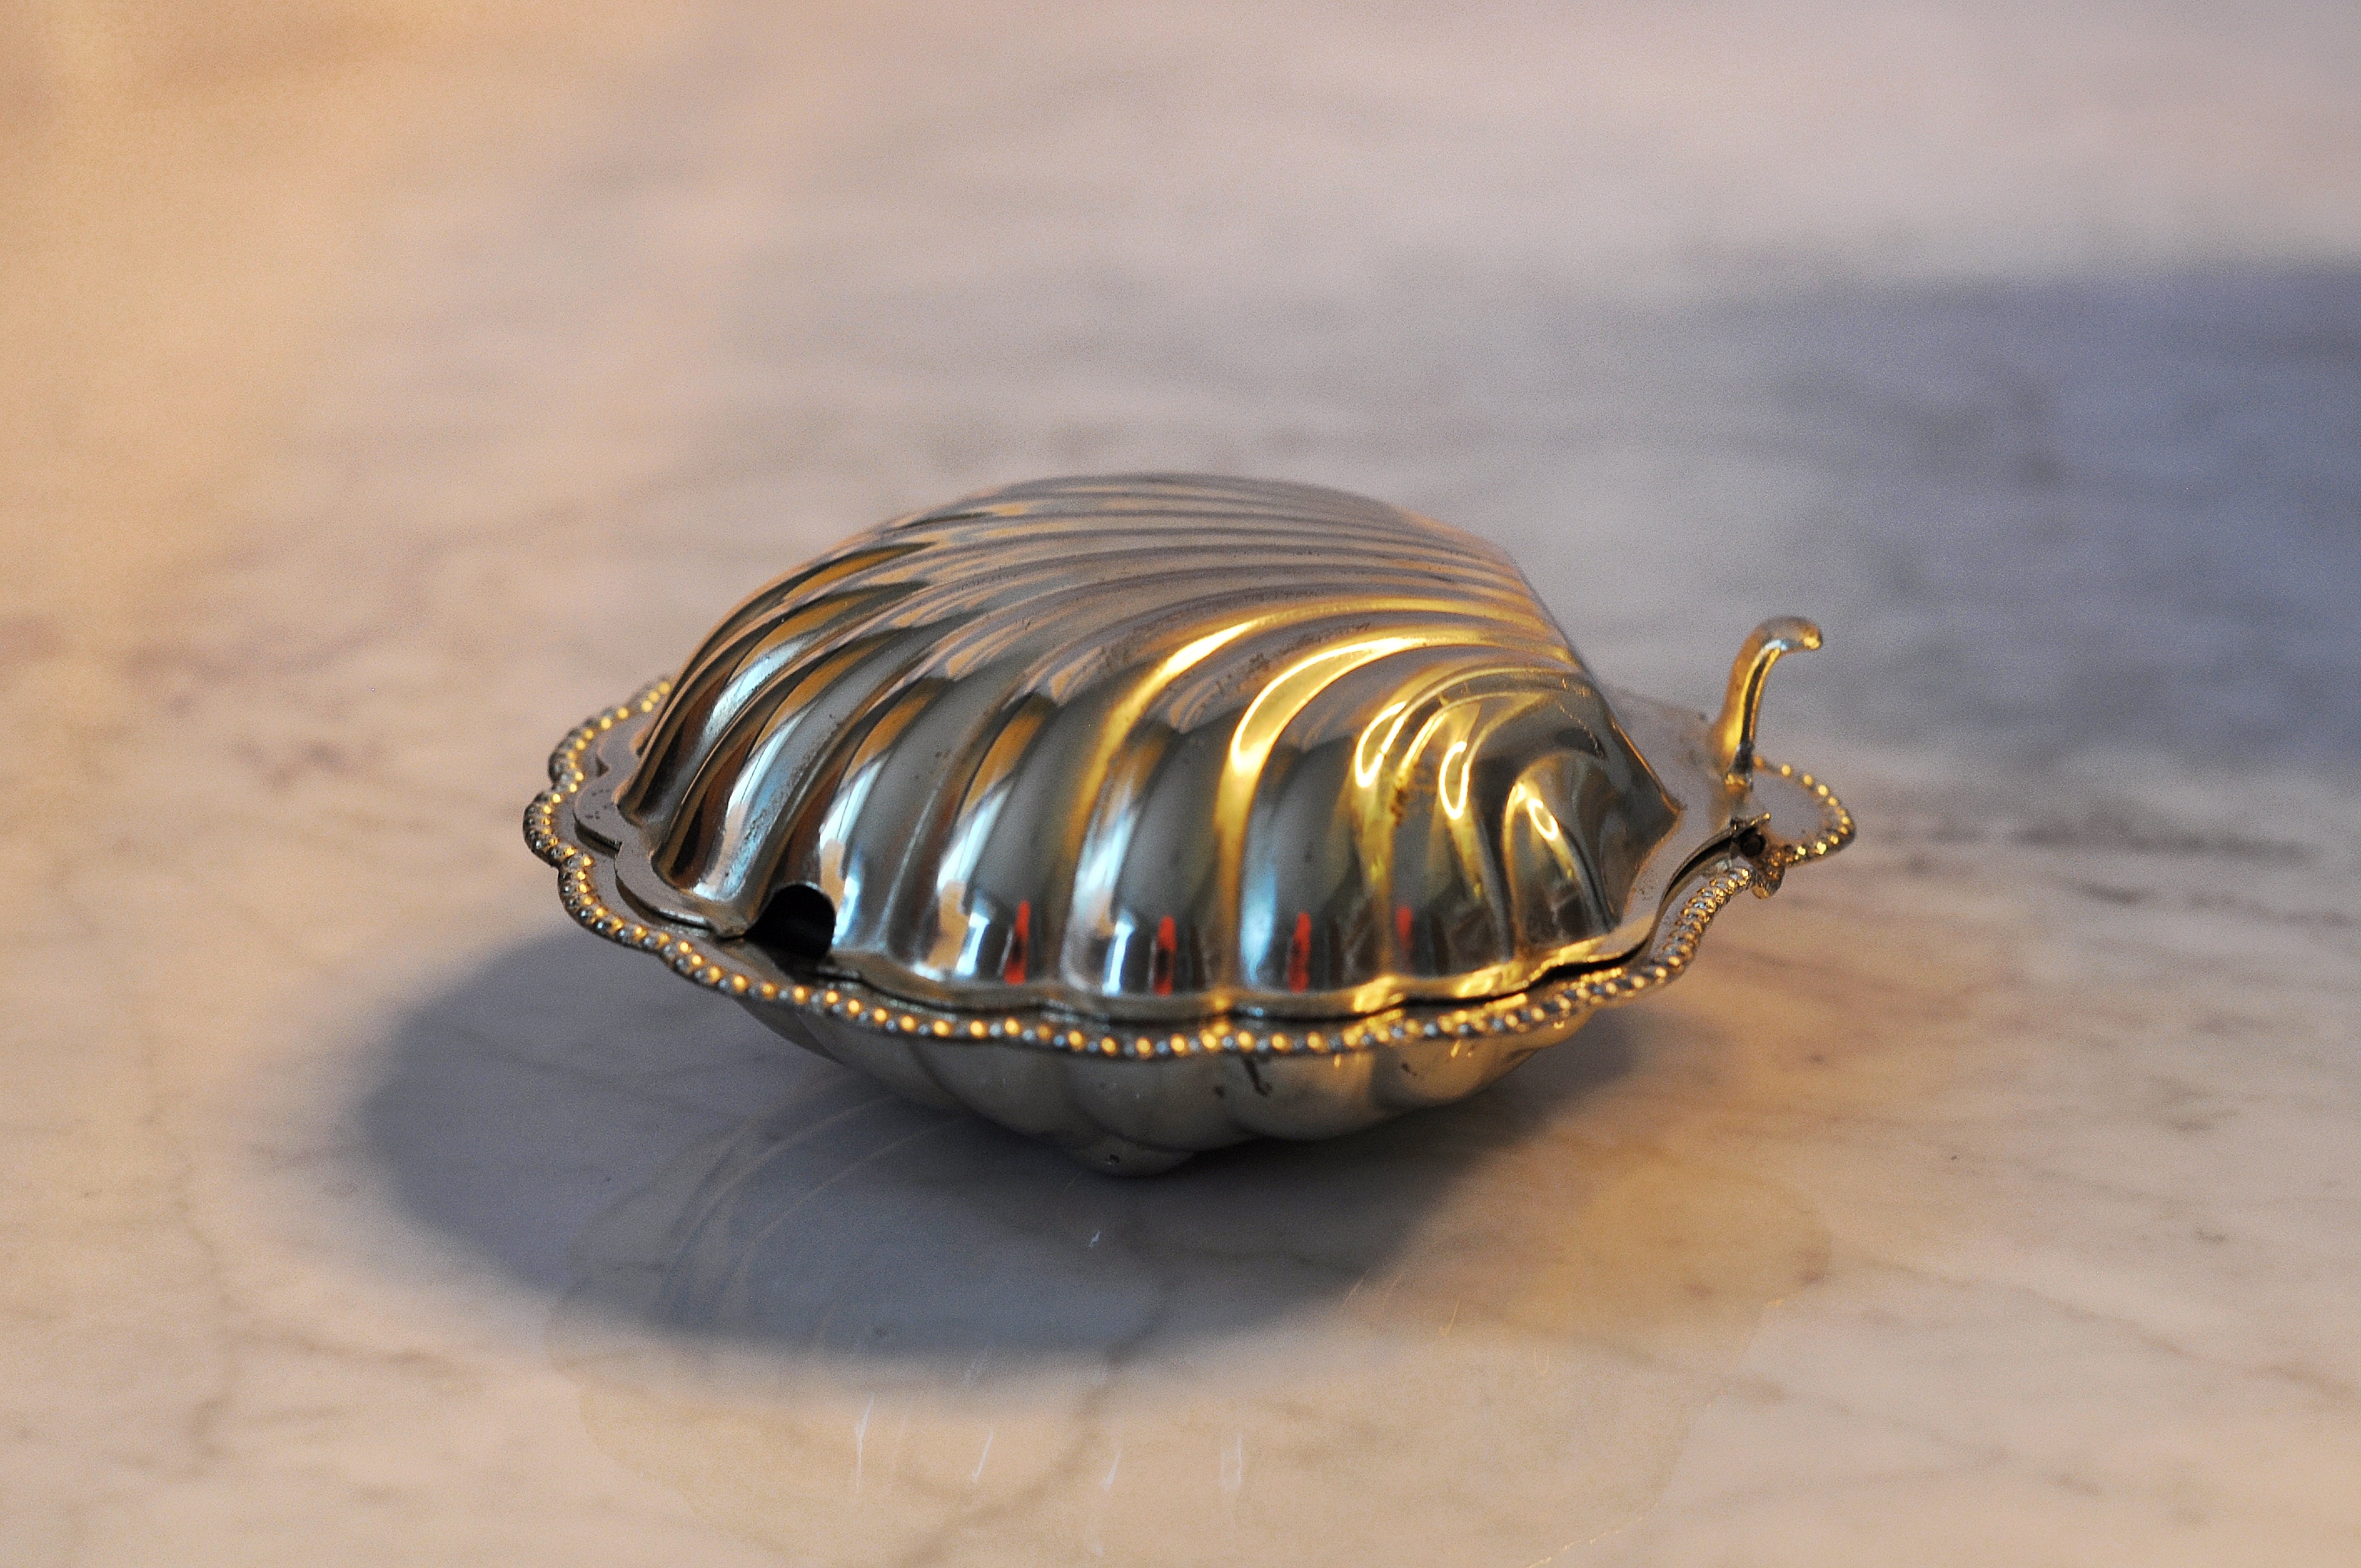 Vintage Chrome-toned Scallop Dish, Used for Caviar or Butter